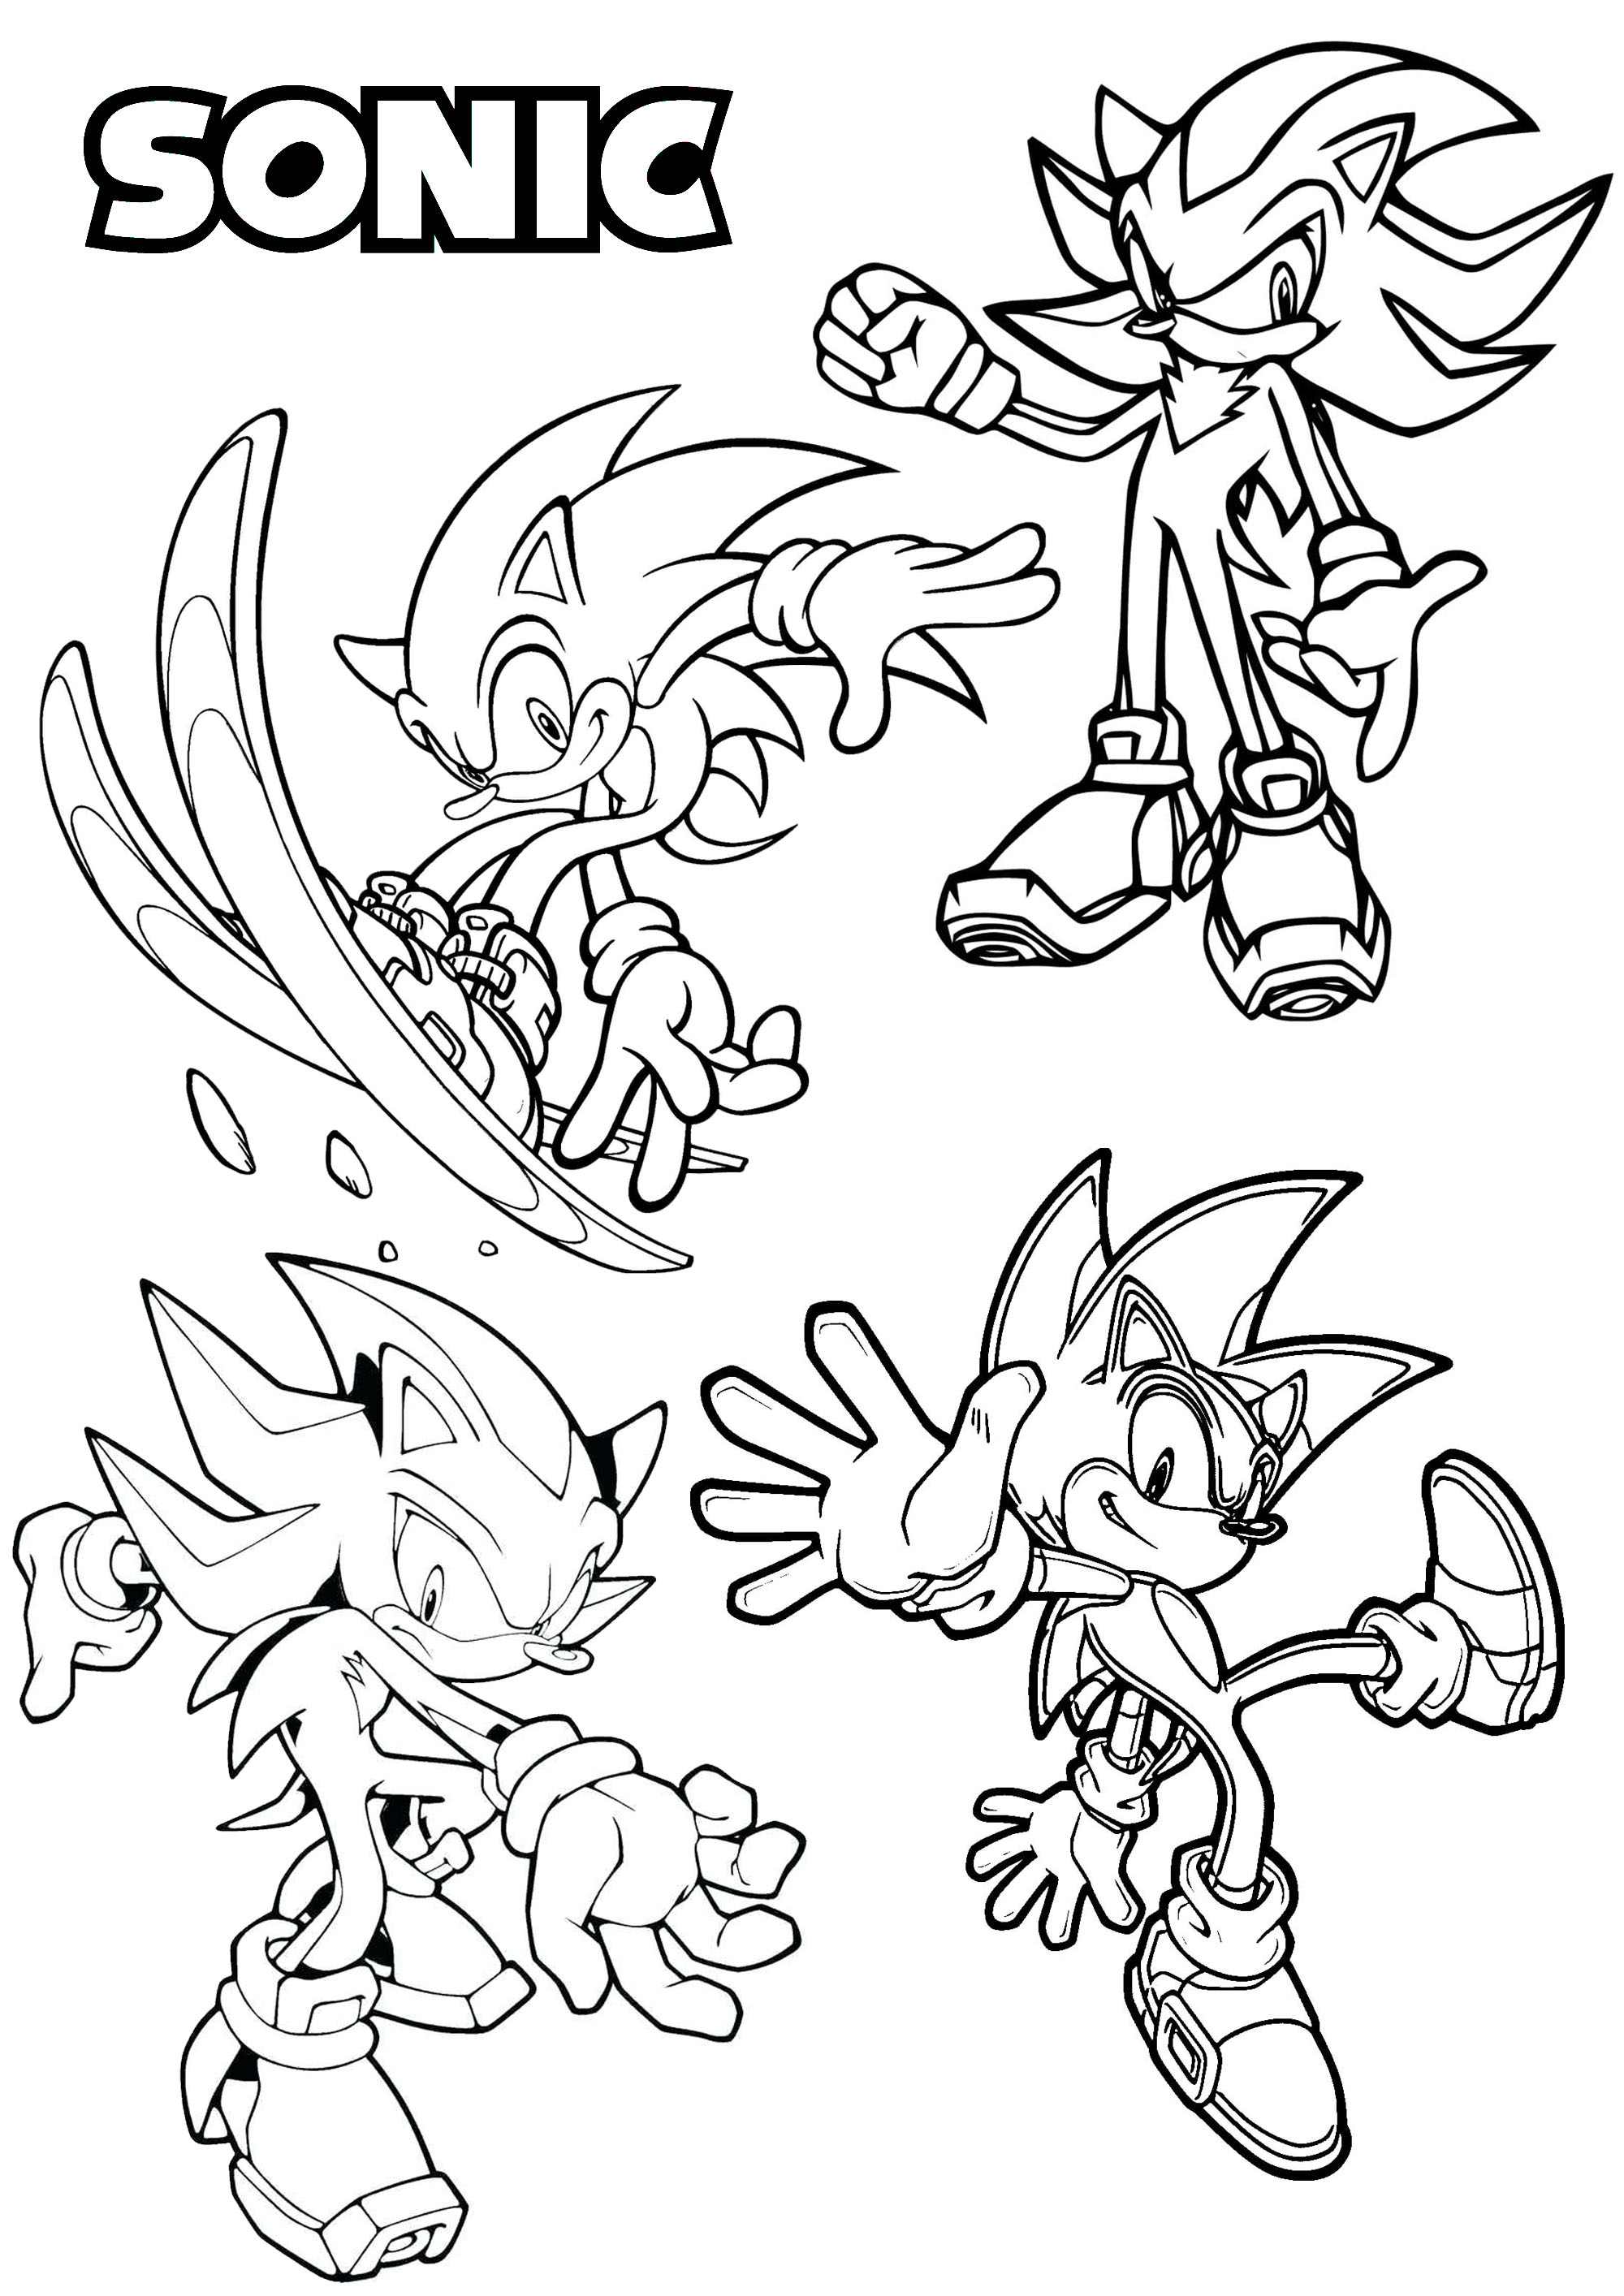 Sonic the Hedgehog - Return to childhood Adult Coloring Pages